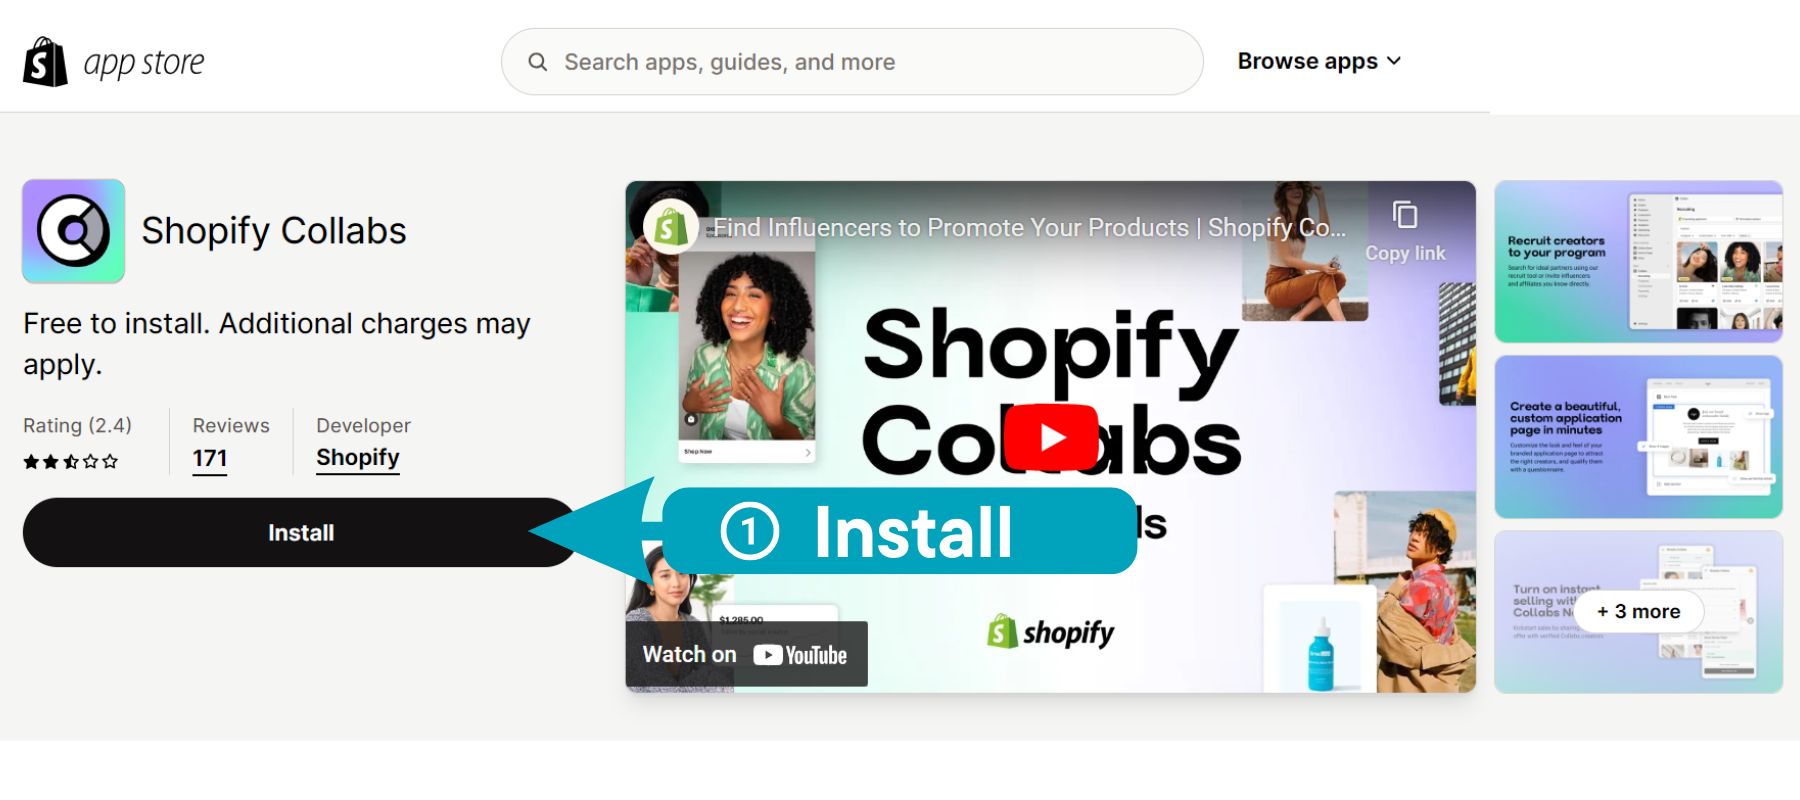 The way to install Shopify Collabs